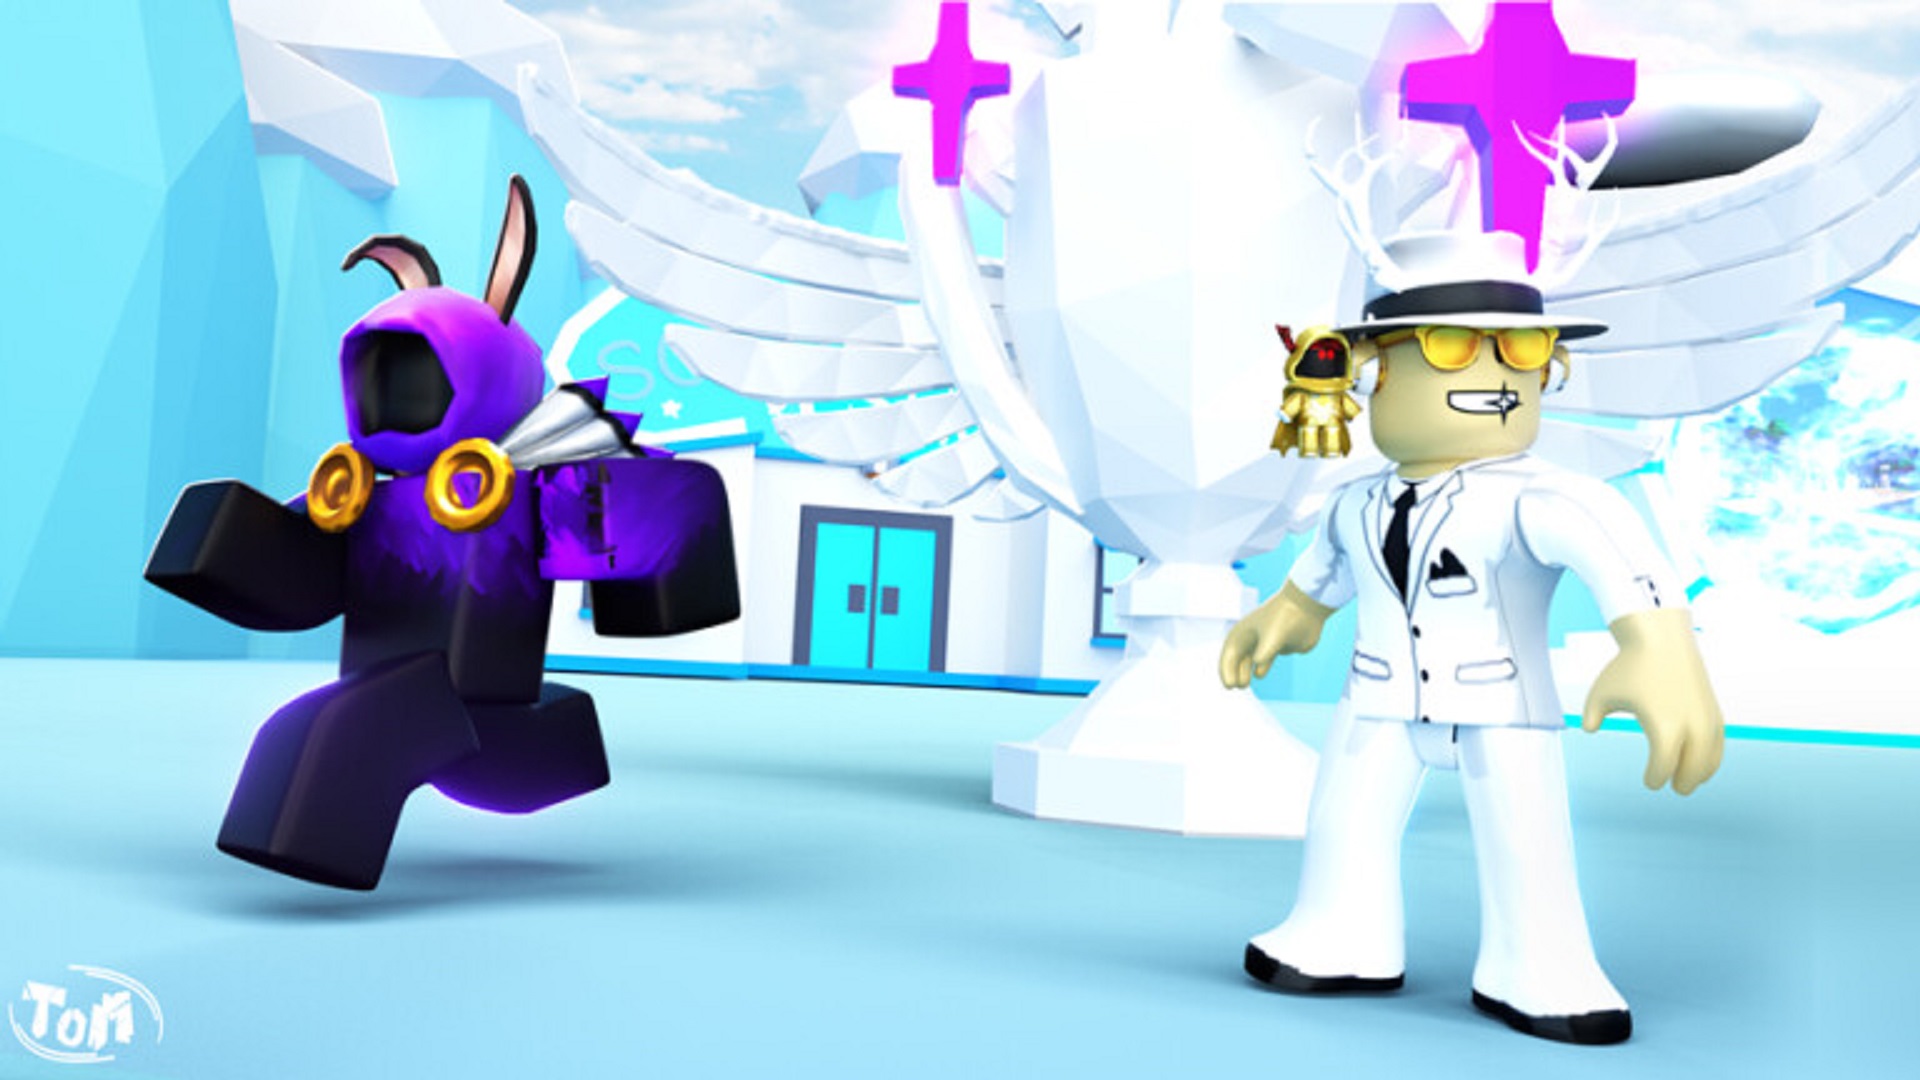 Codigo 🎊5M Event🎊 🧪Science Simulator : Codigo 5m Event Science Simulator New Latest Simulator Codes 2018 Dinosaur New Dino How To Play Science Simulator Roblox Game Srkaxvxrwujmu / For this reason we are attempting hard to find specifics of code roblox [5m event.